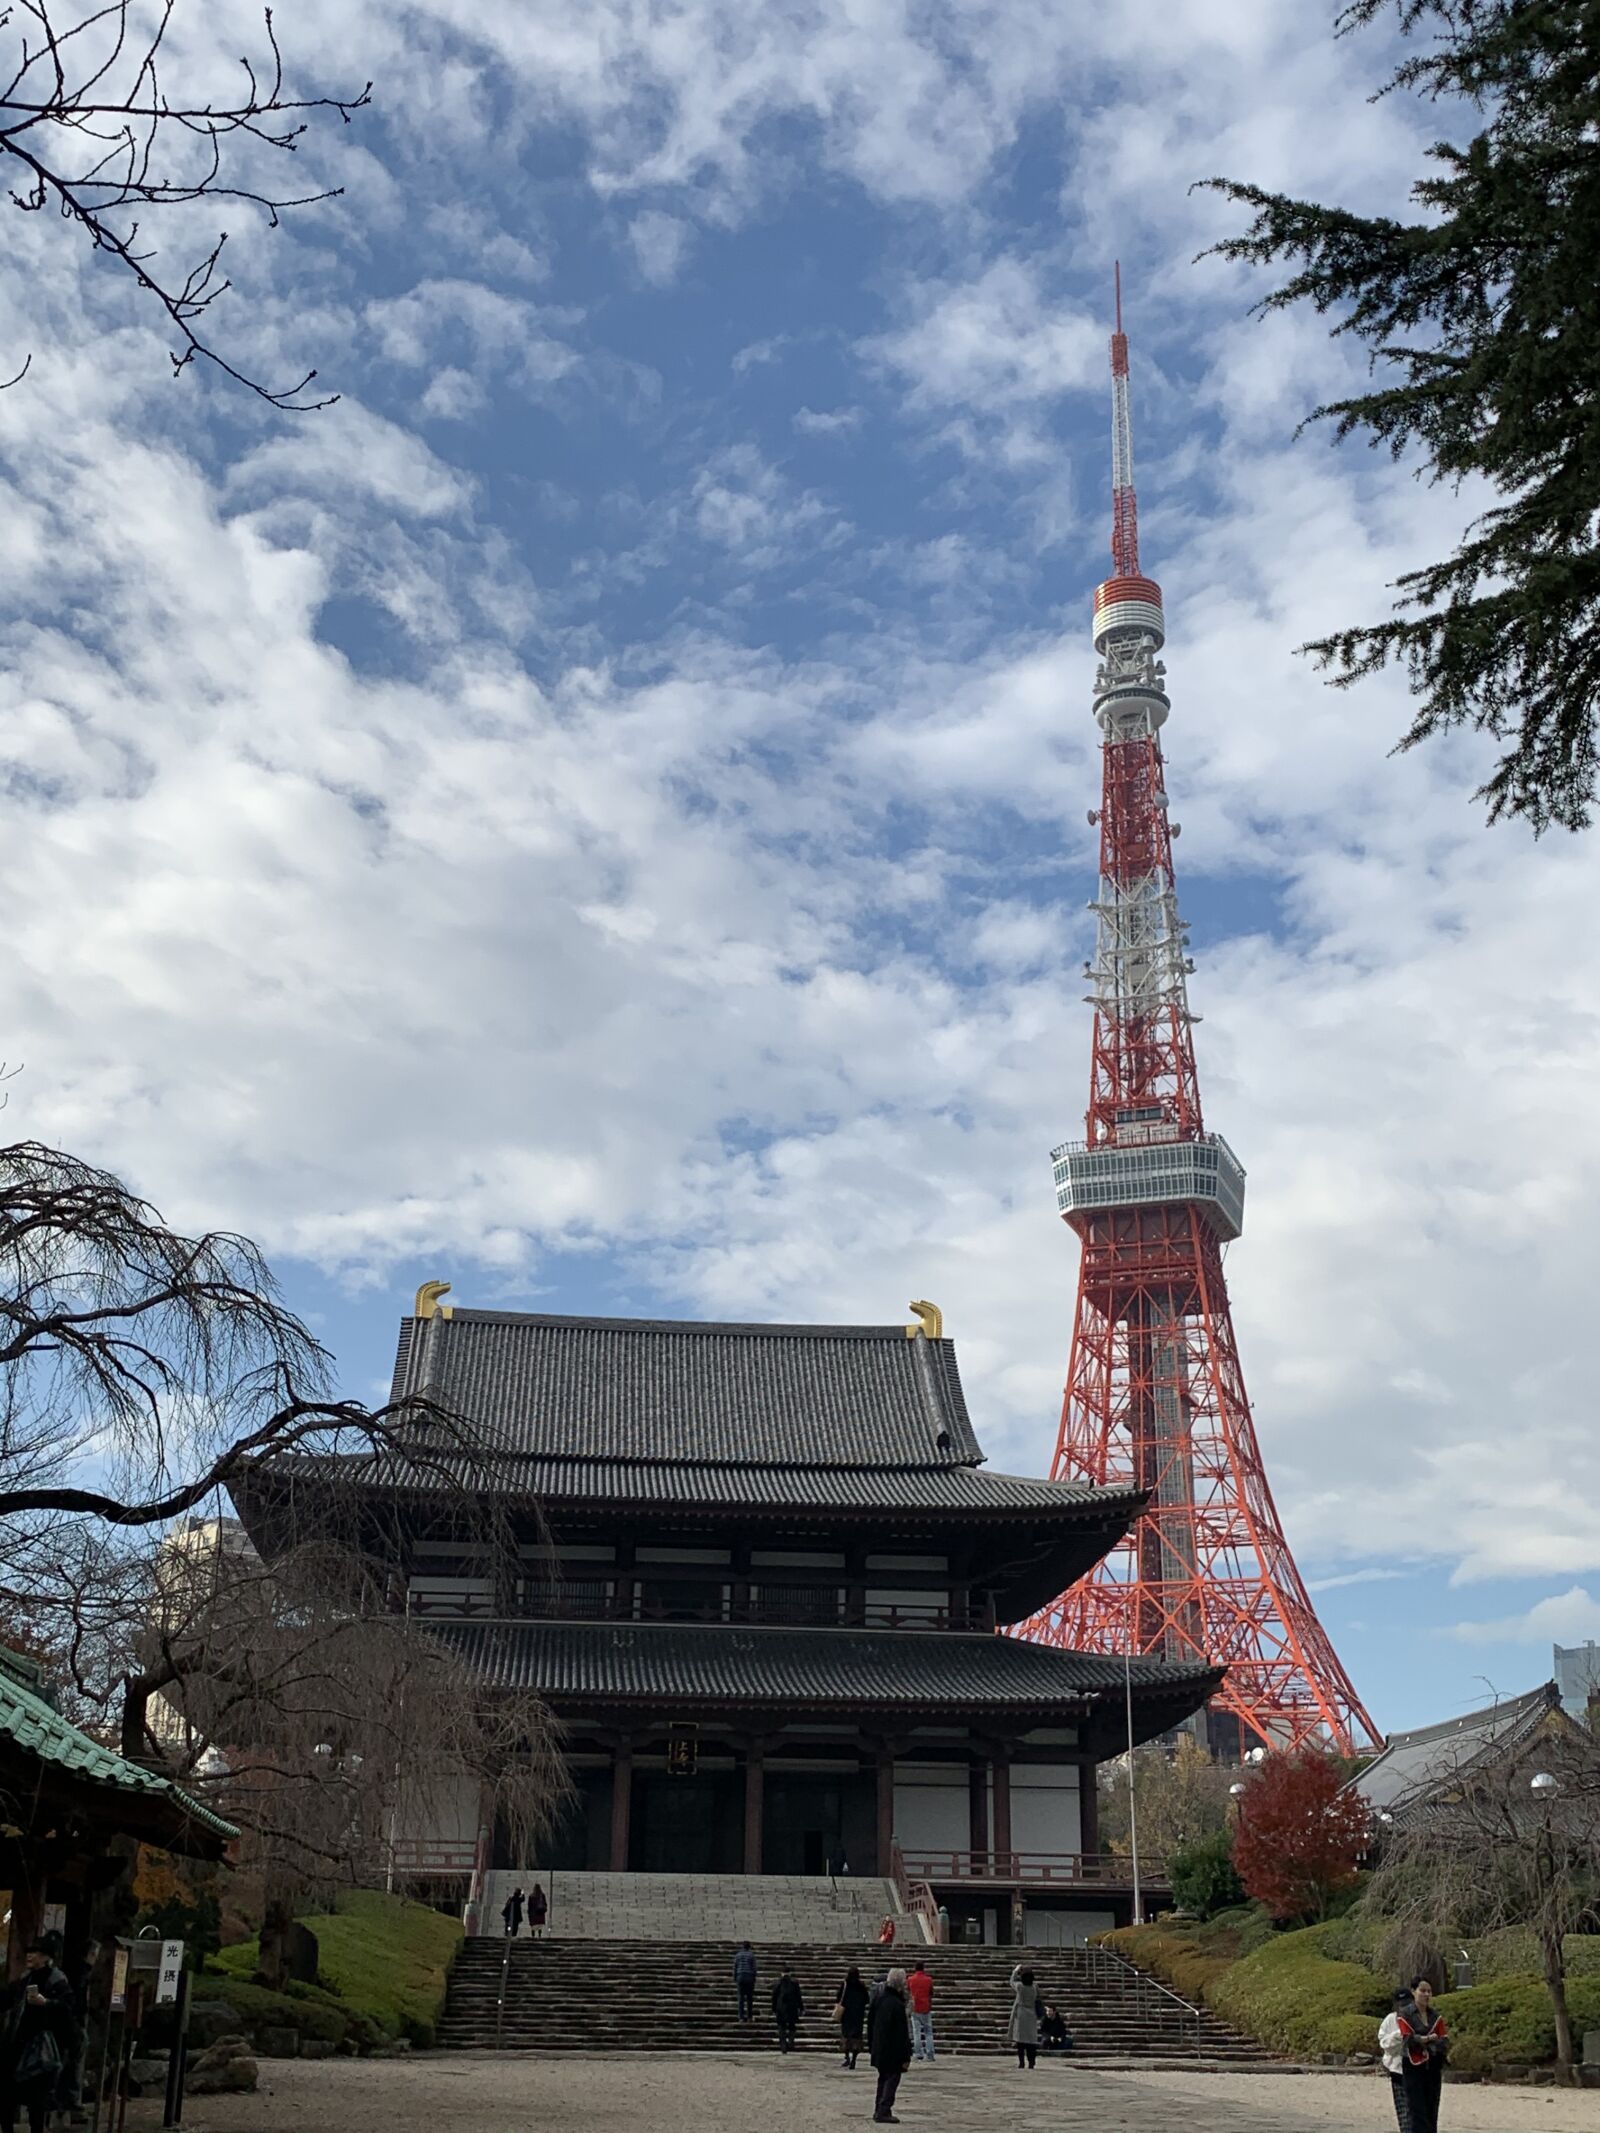 Apple iPhone XS Max sample photo. Shrine, tower, architecture photography